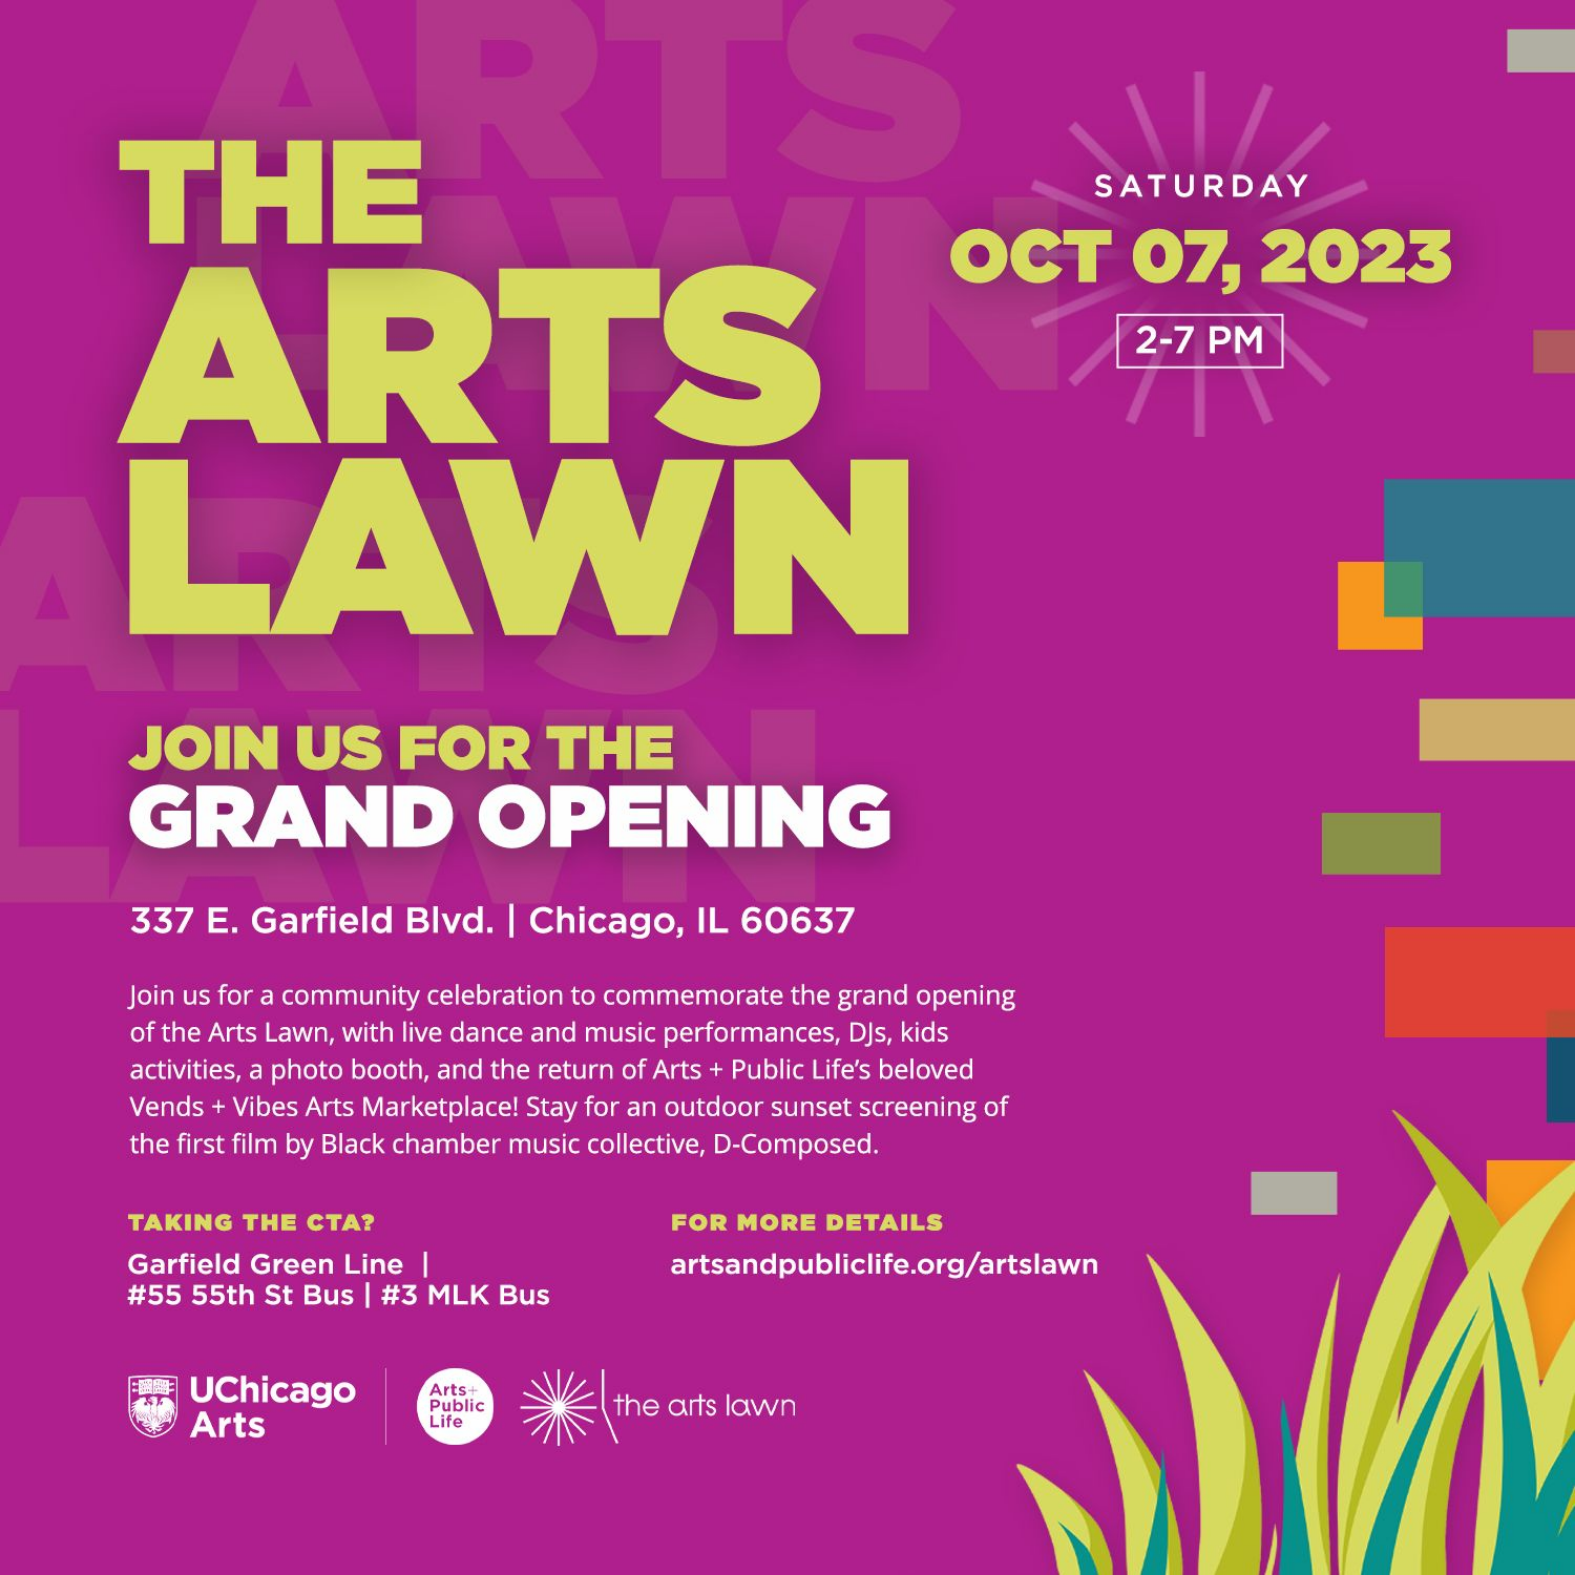 "Arts + Public Life JOIN US FOR THE GRAND OPENING 337 E. Garfield Blvd. | Chicago, IL 60637 Join us for a community celebration to commemorate the grand opening of the Arts Lawn, with live dance and music performances, DJs, kids activities, a photo booth, and the return of Arts + Public Life's beloved Vends + Vibes Arts Marketplace! Stay for an outdoor sunset screening of the first film by Black chamber music collective, D-Composed.